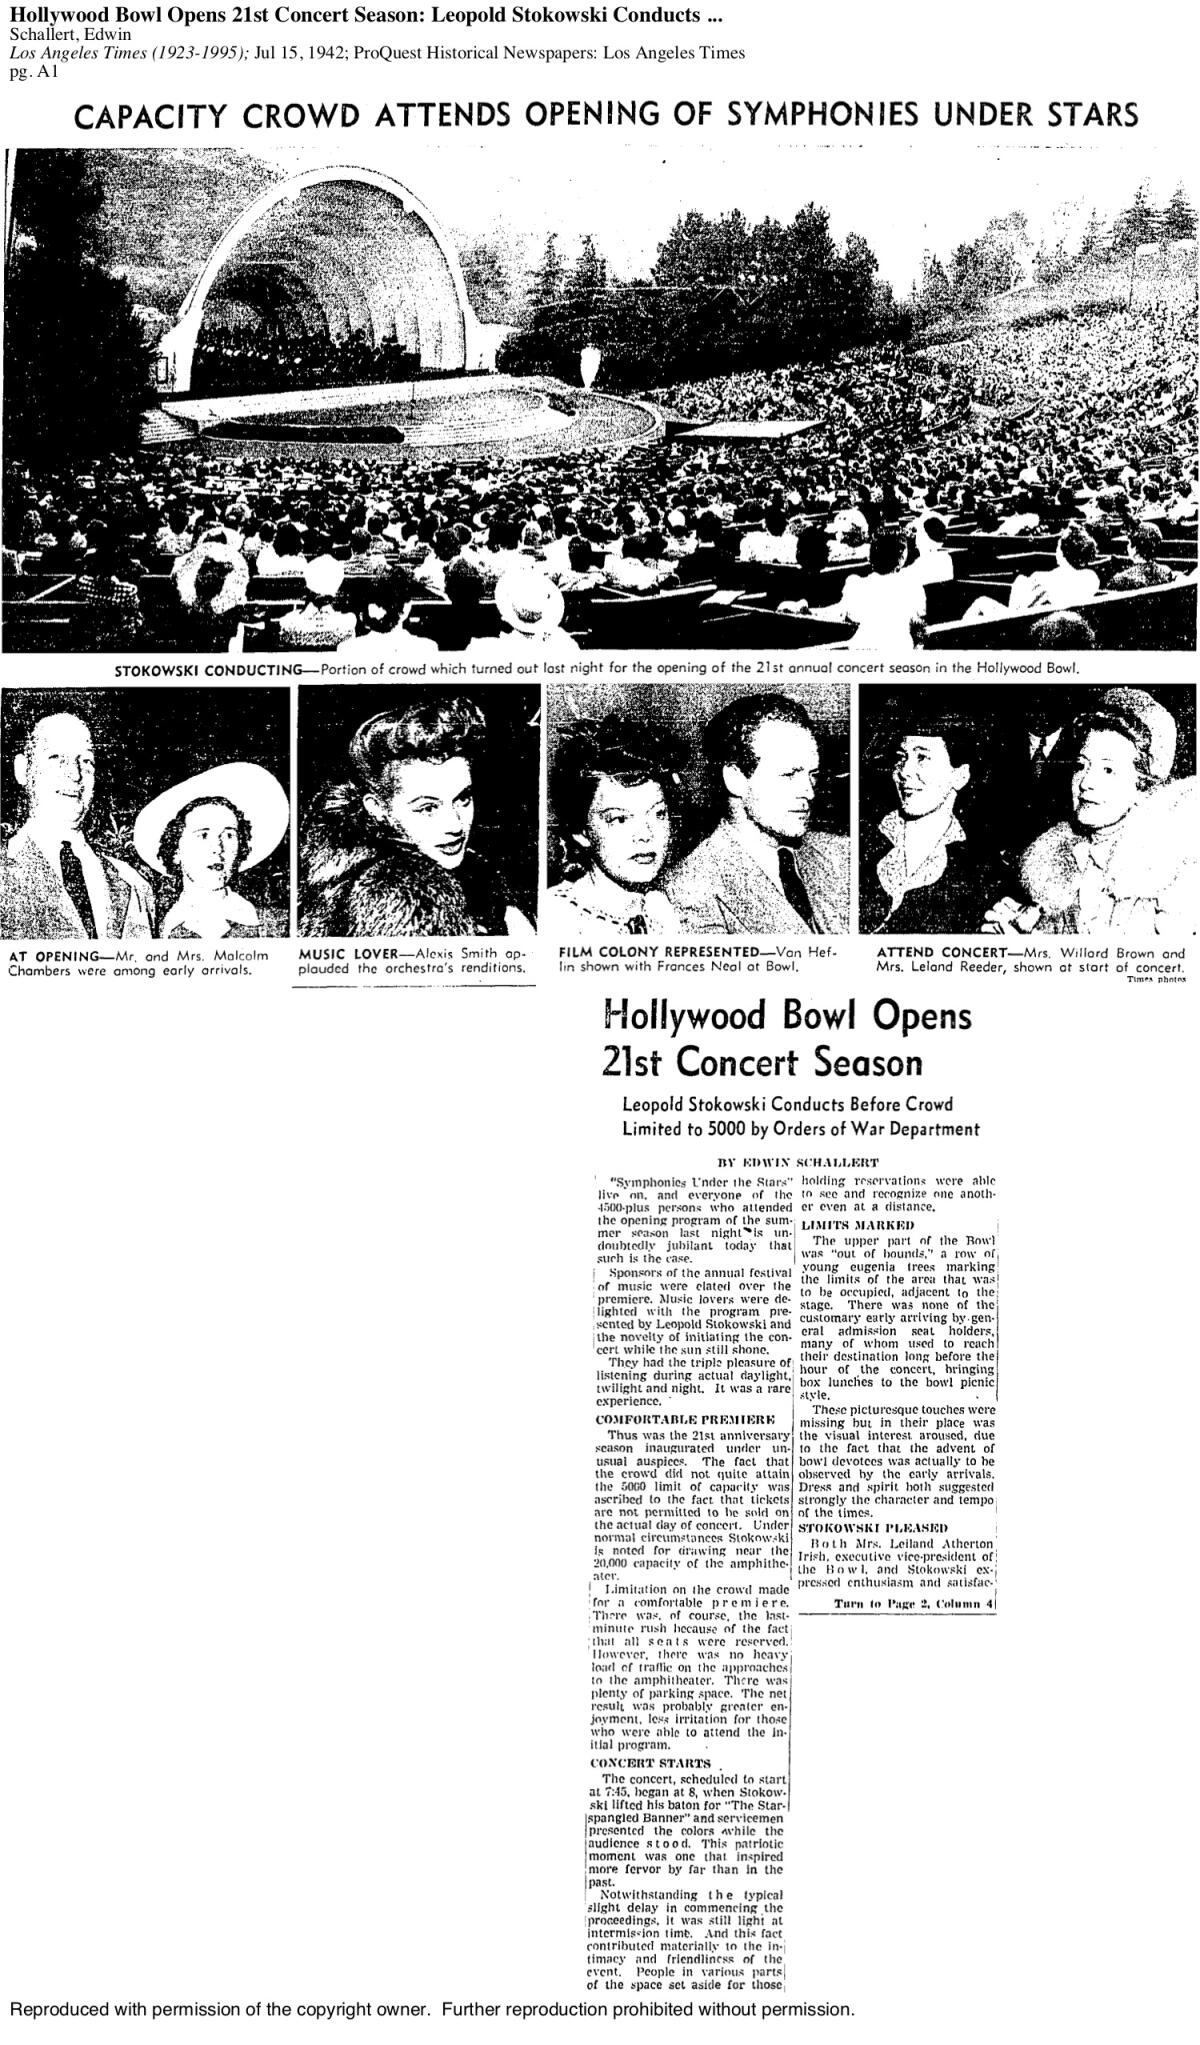 July 15, 1942: The Times runs a story about the opening of the season at the Hollywood Bowl, with a caveat that crowd size had been limited to 5,000 as a wartime safety measure.